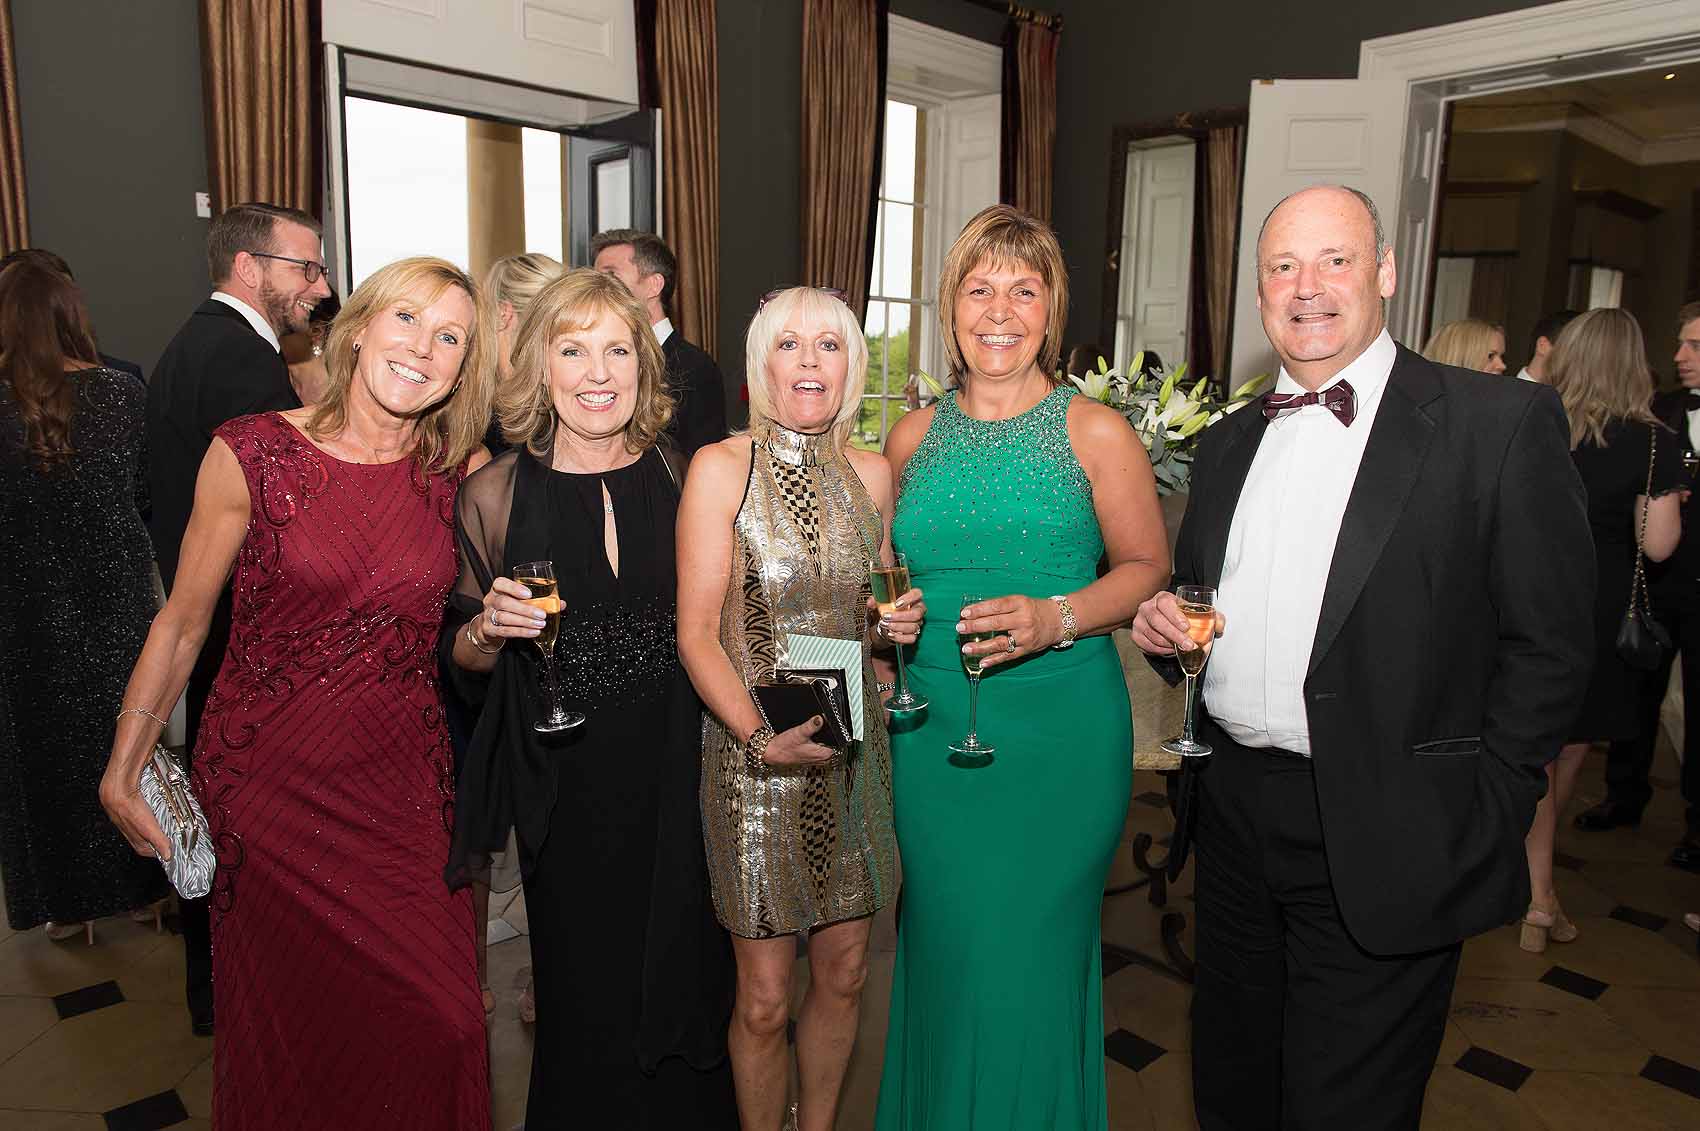 Martin House Hospice Care for Children and Young People held its annual Glitter Ball